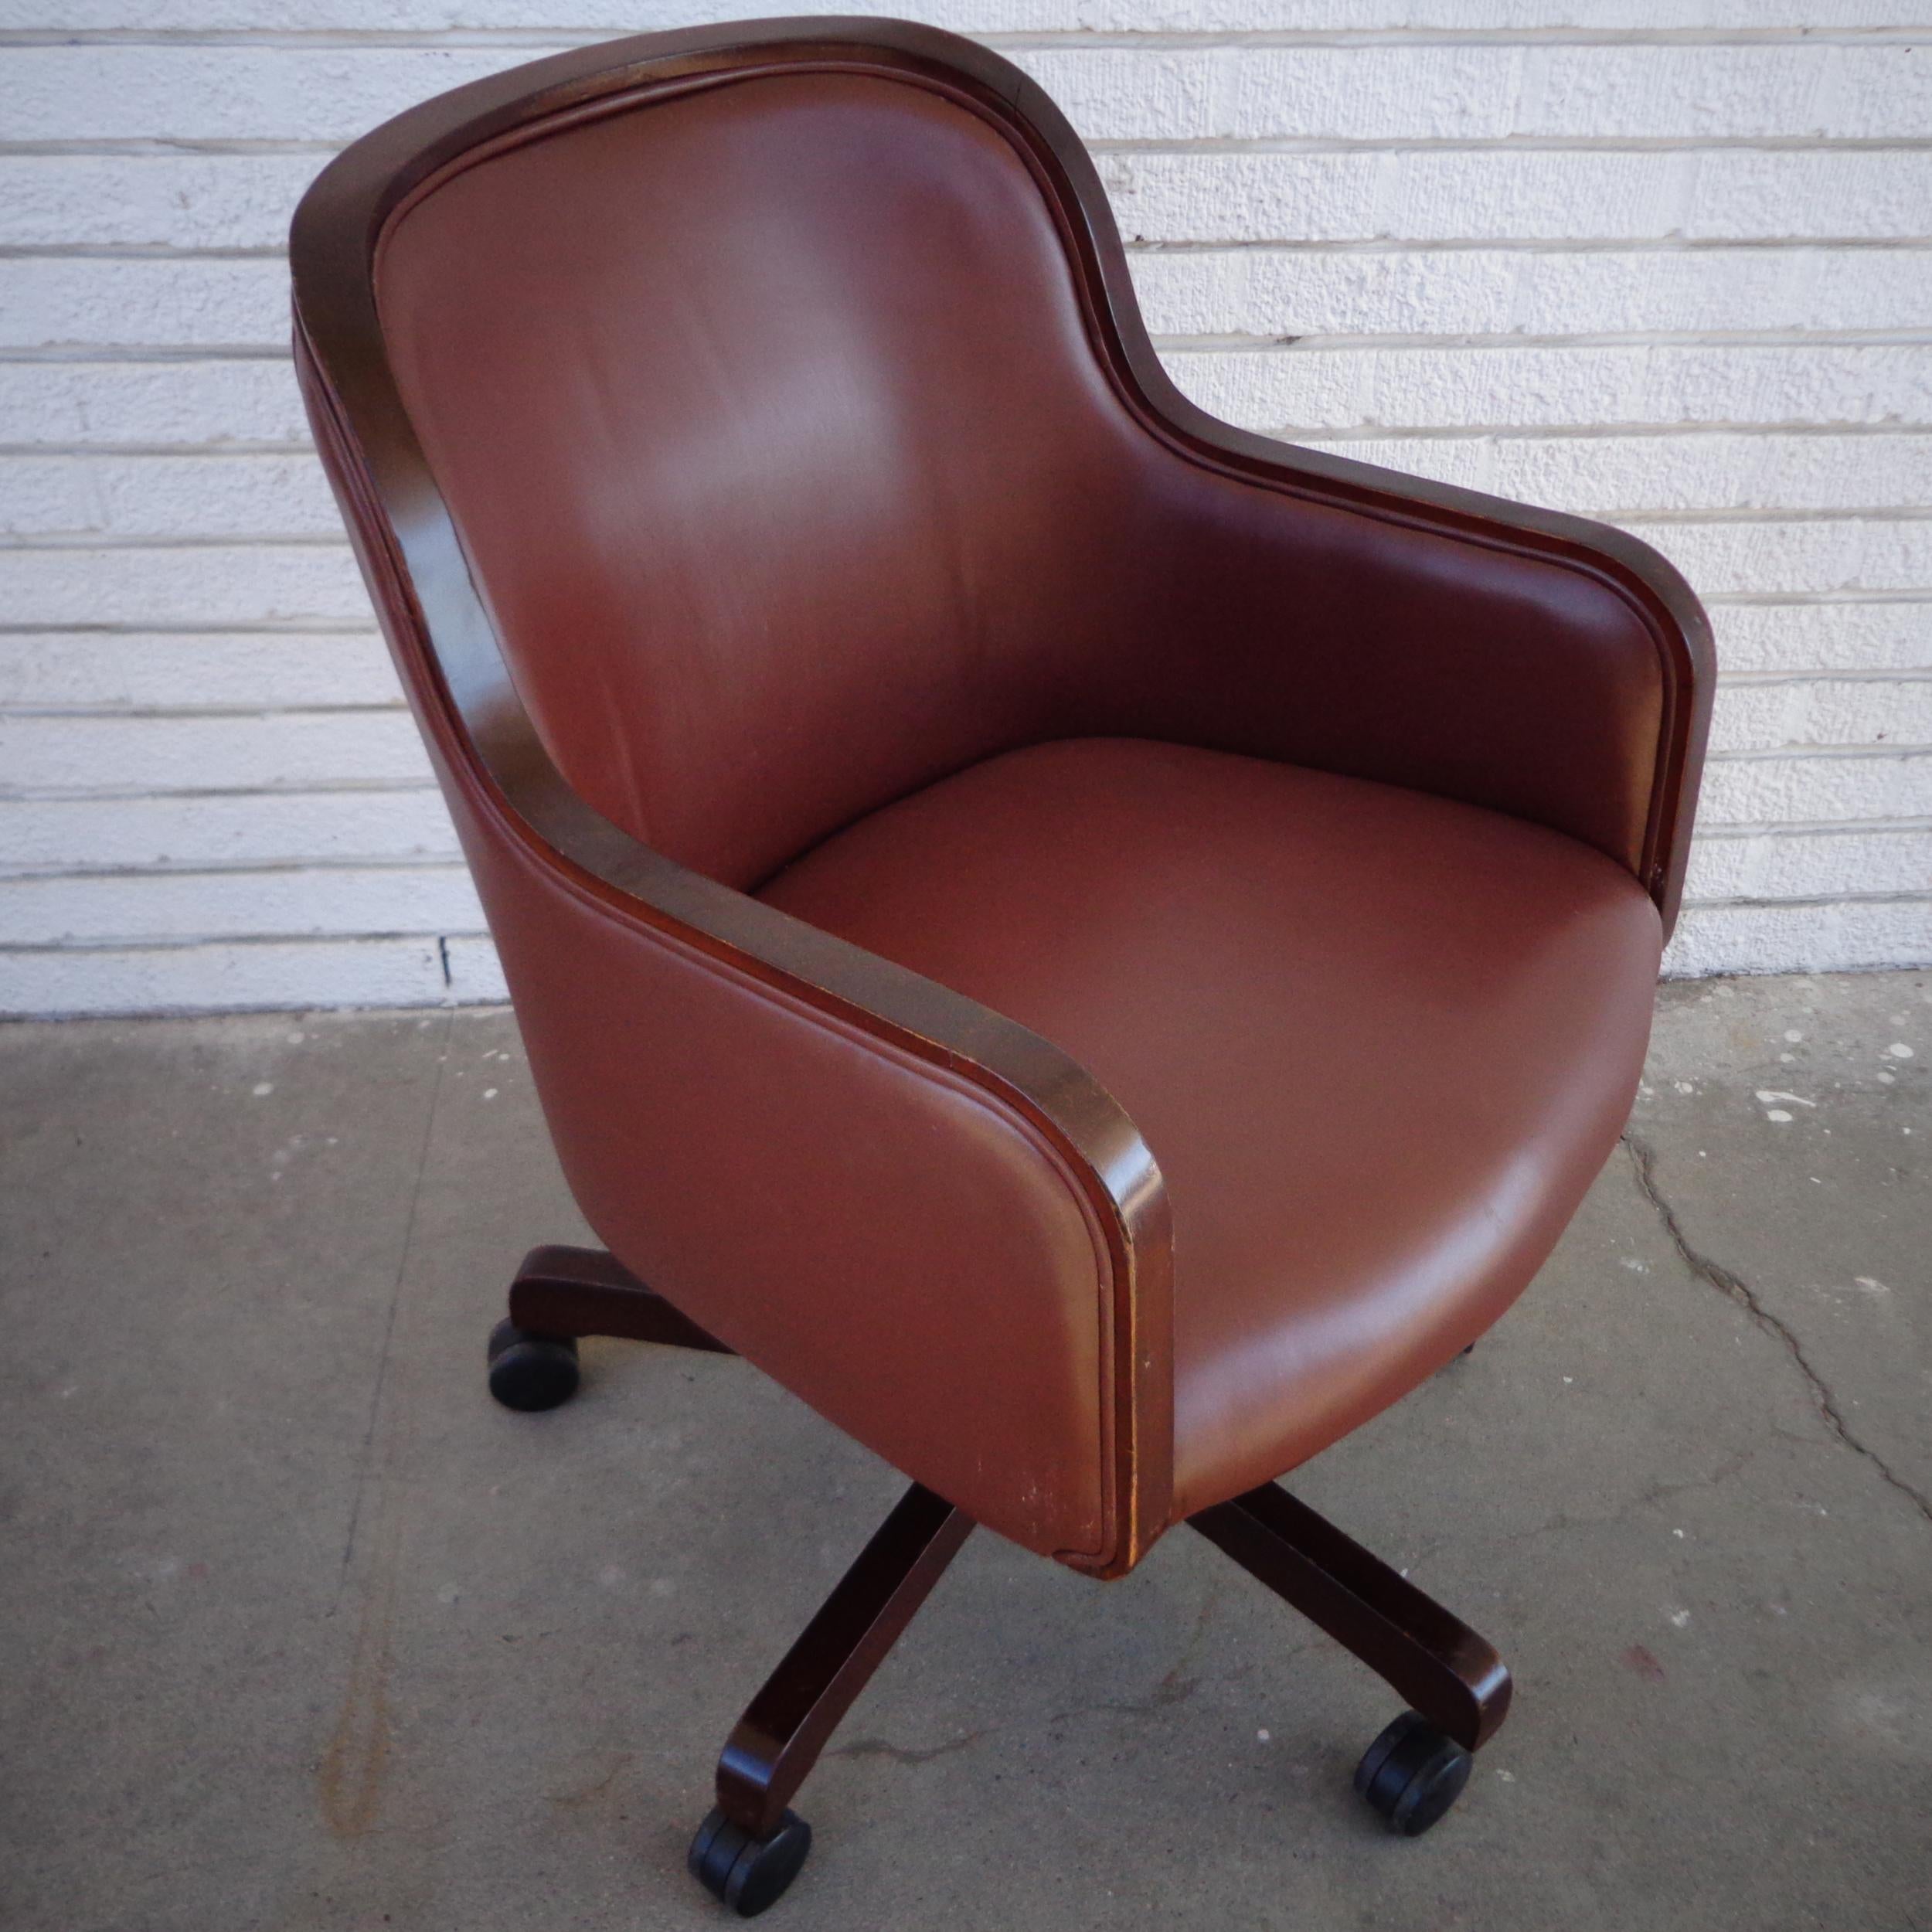 1 Ward Bennett for Brickel and Associates Leather Desk Chair In Good Condition For Sale In Pasadena, TX